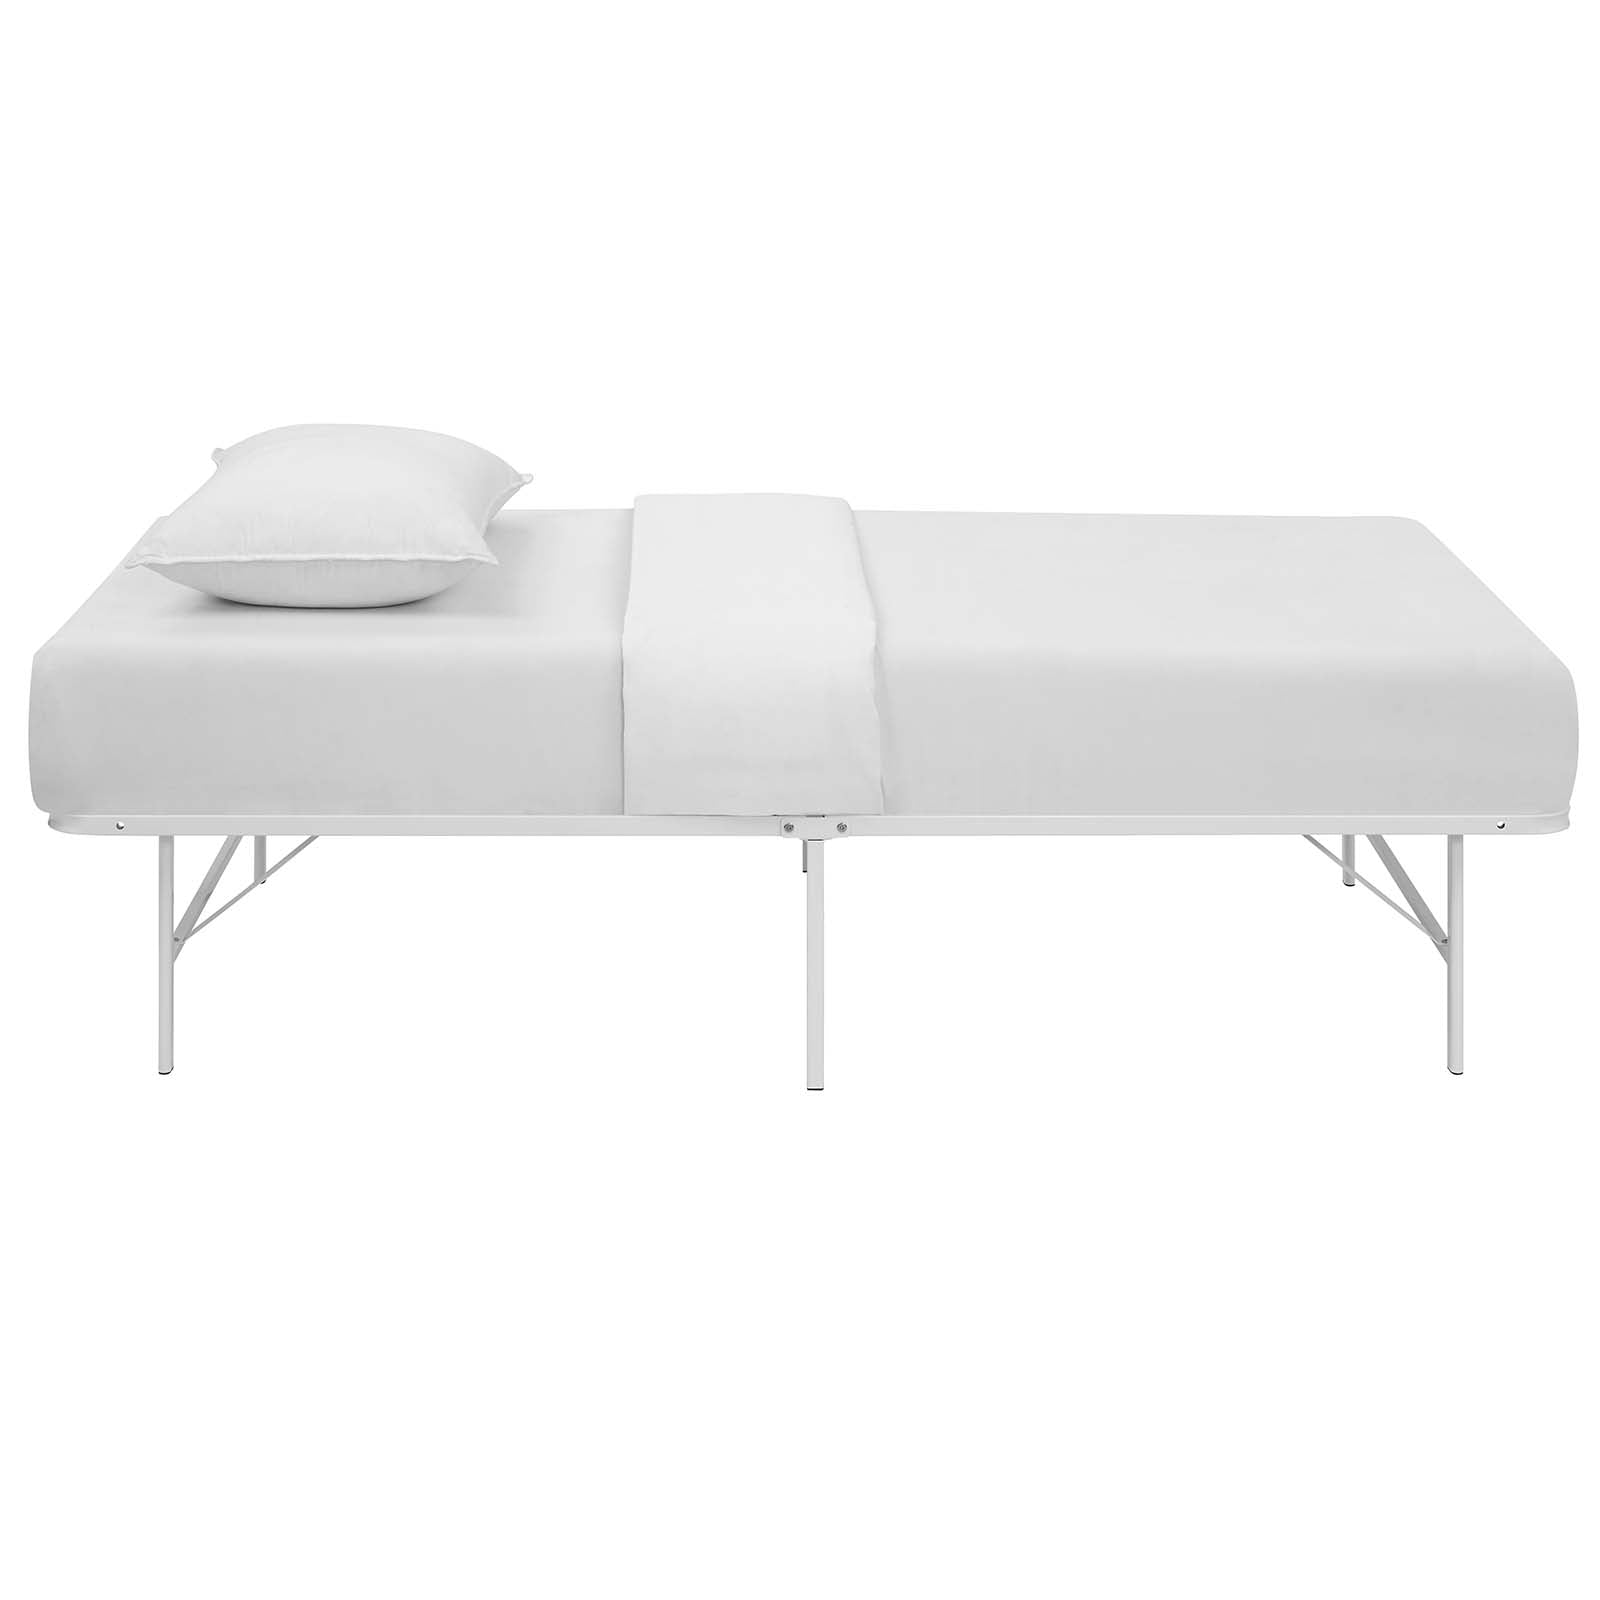 Modway Beds - Horizon Twin Stainless Steel Bed Frame White